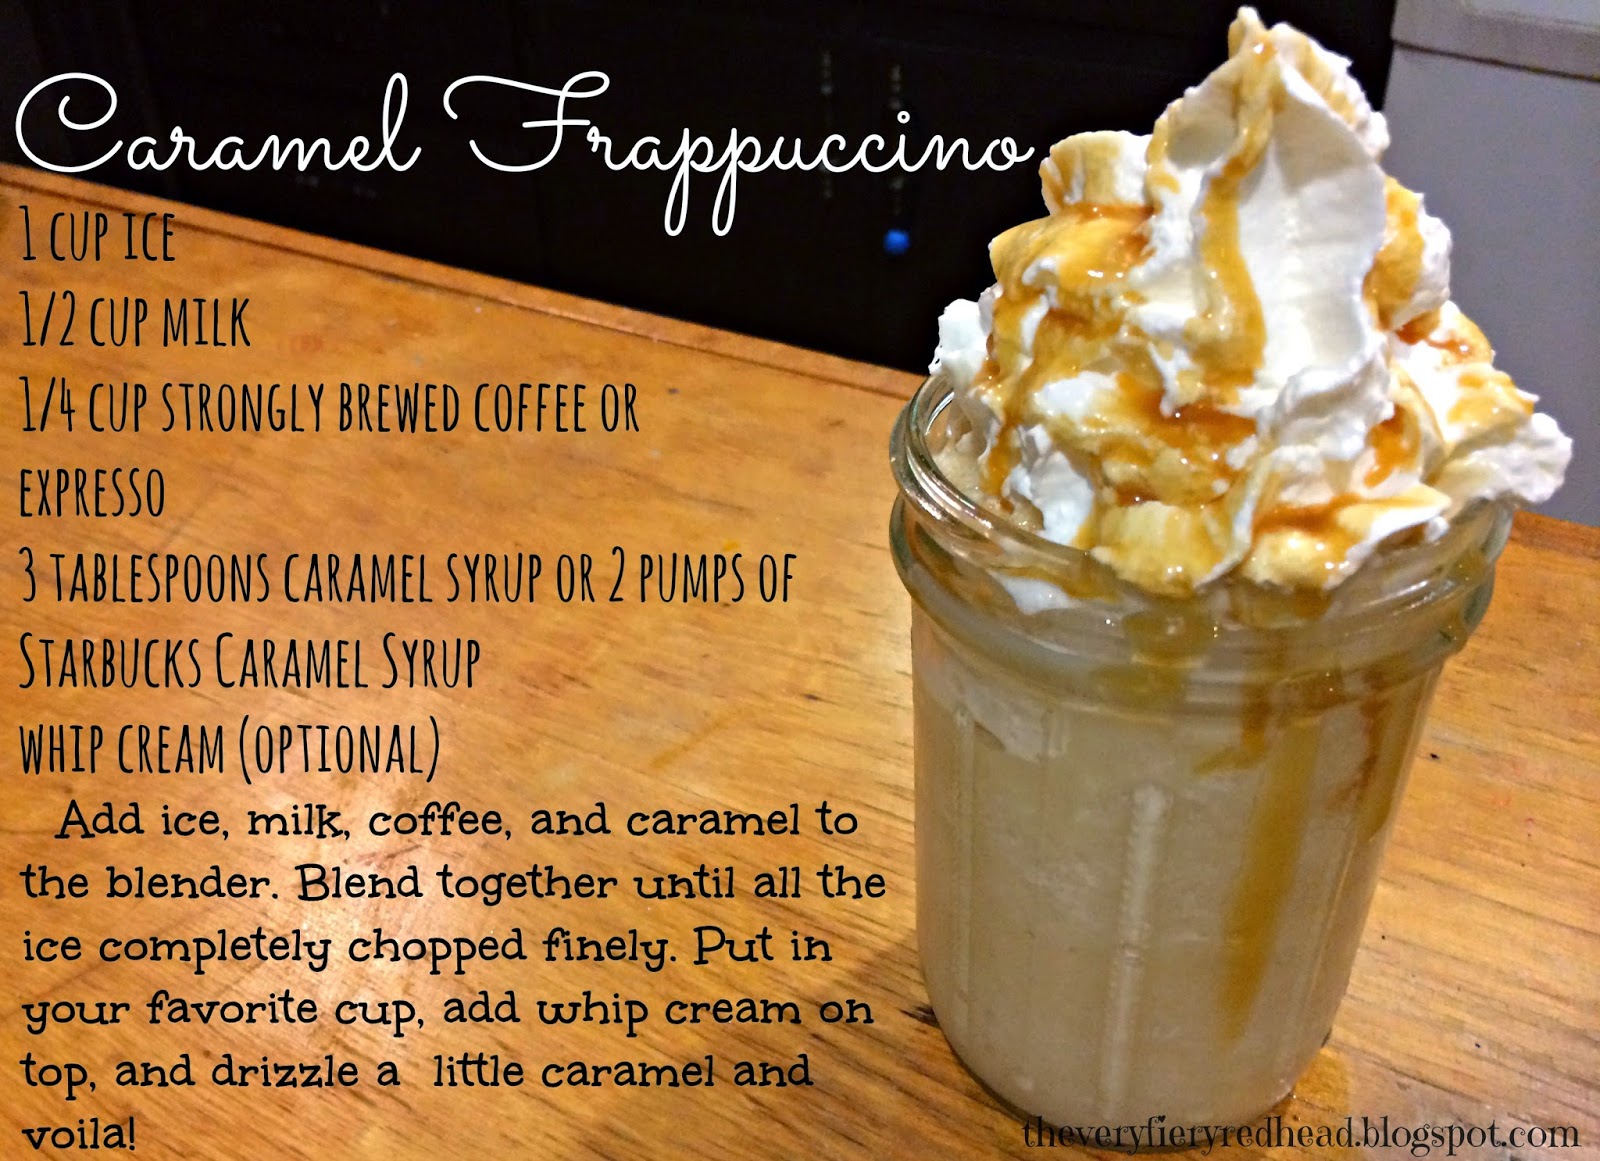 How to Make a Frappe in a Blender